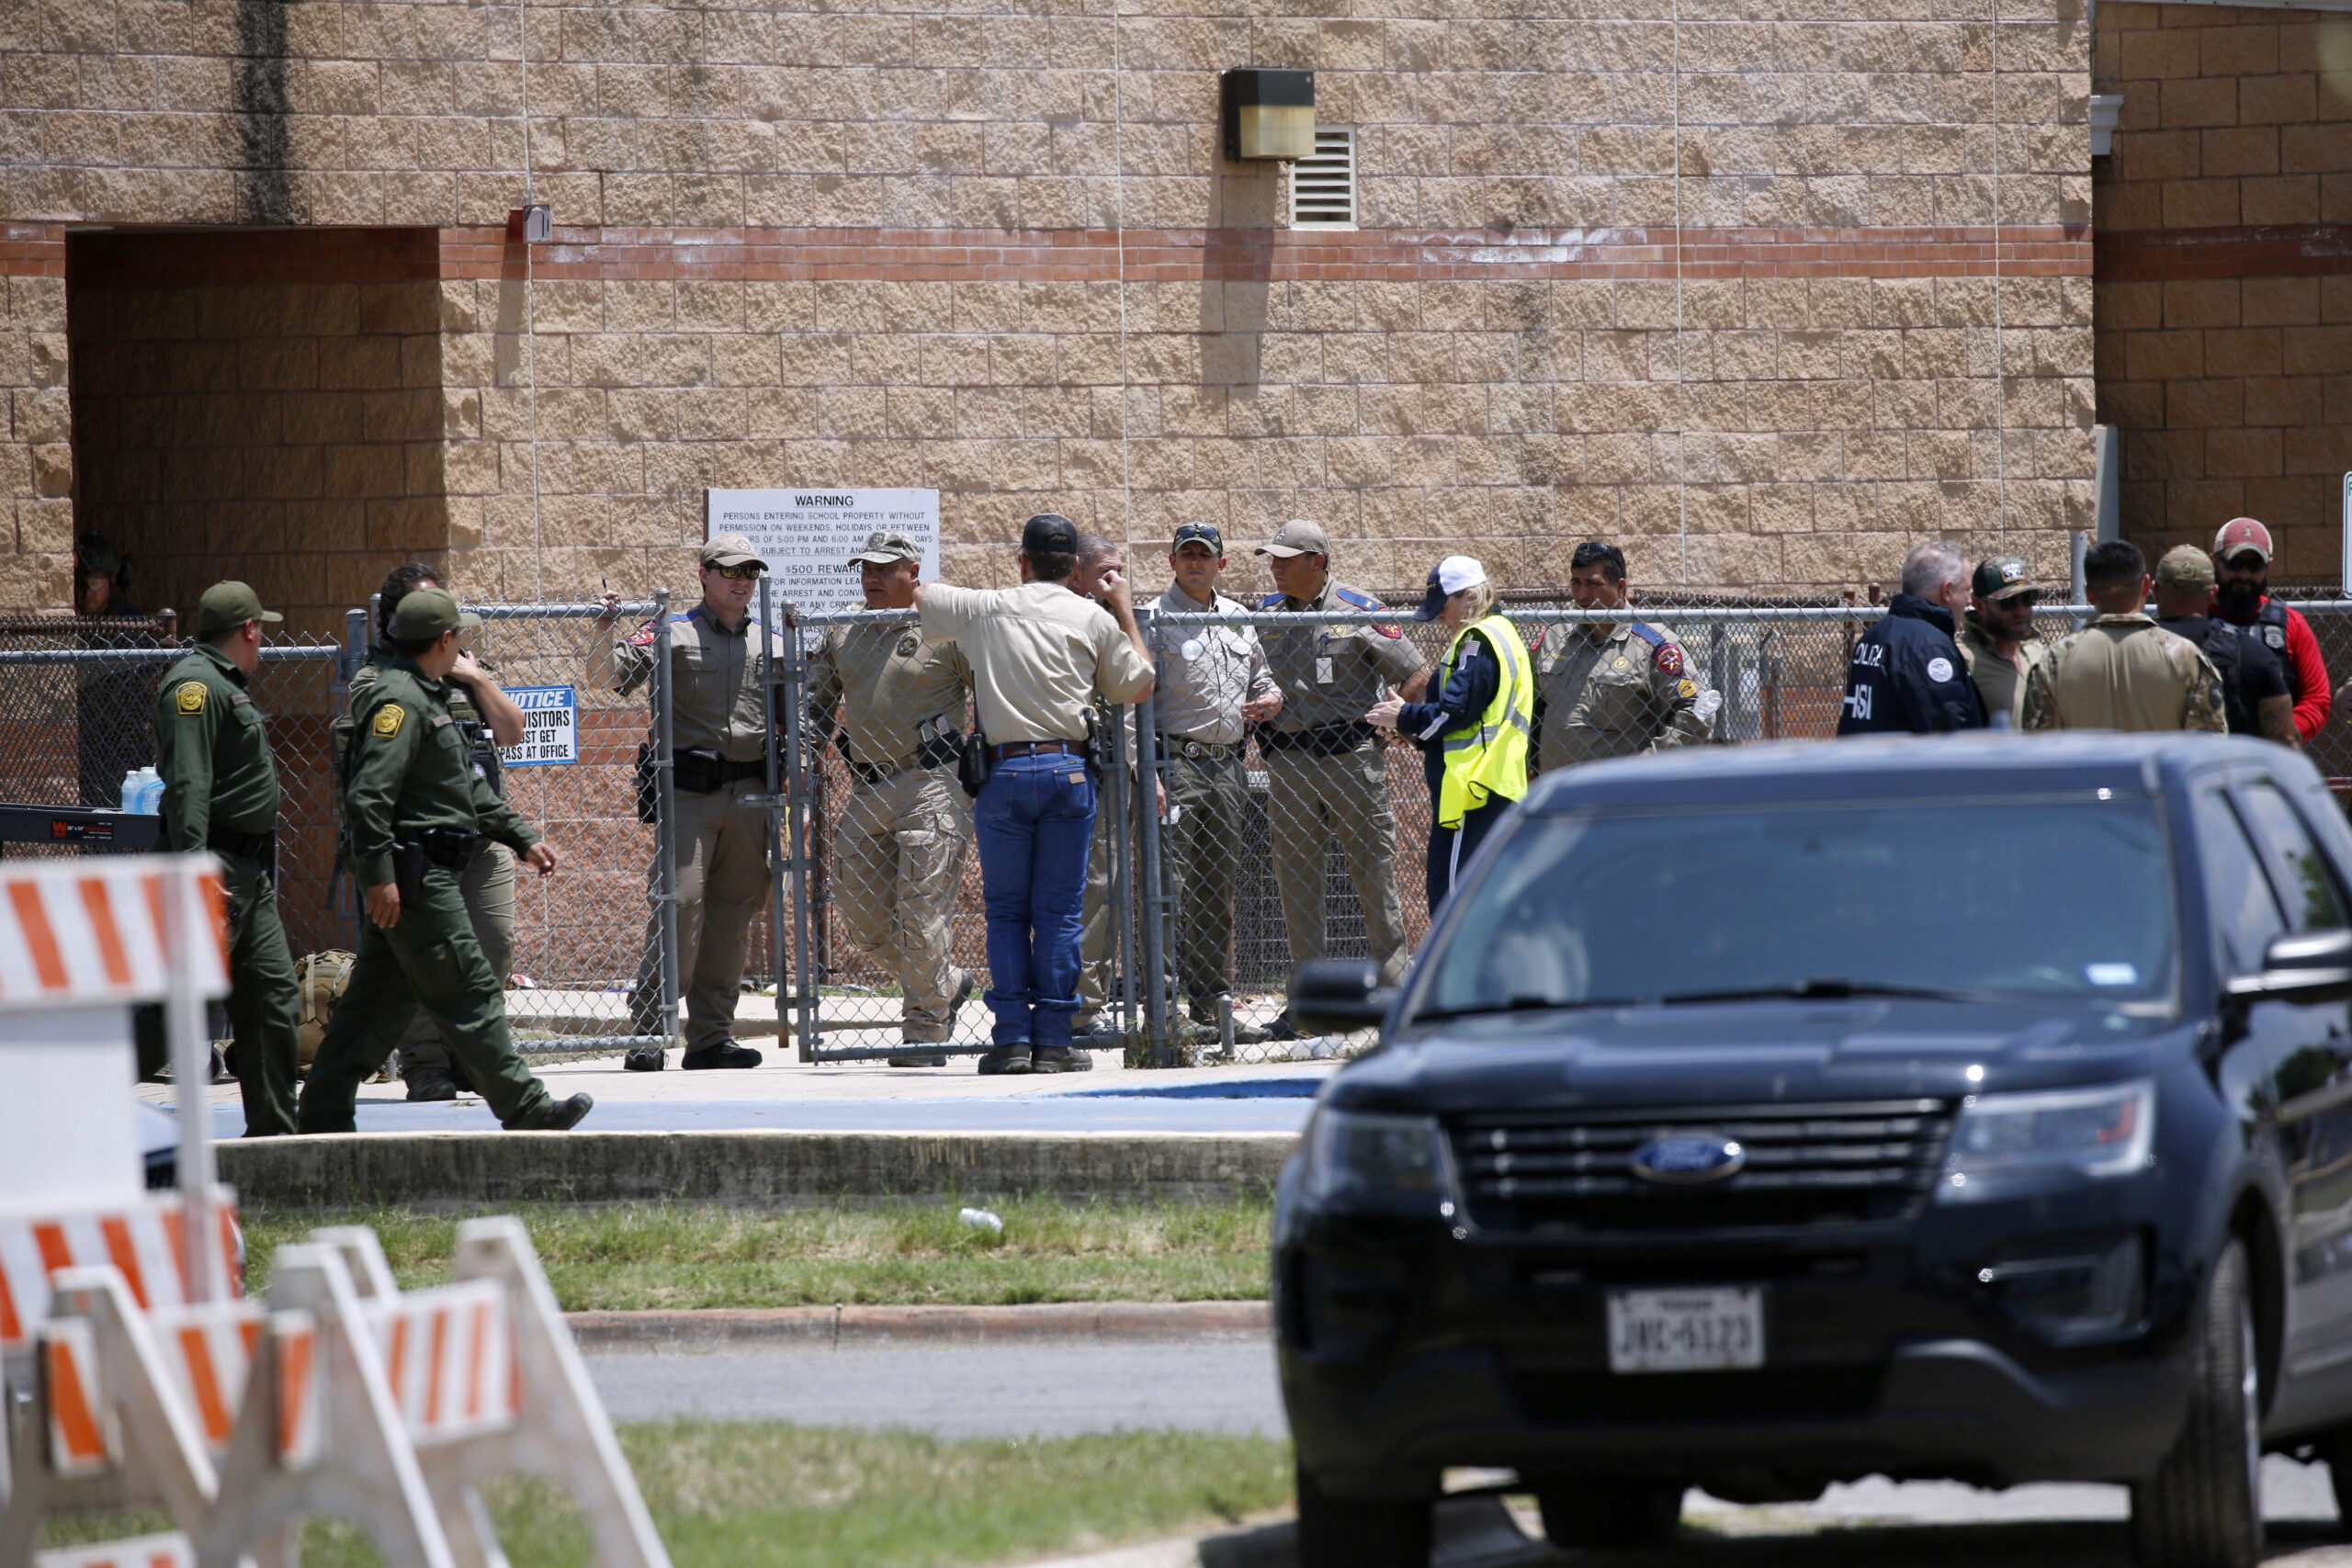 FILE - Law enforcement, and other first responders, gather outside Robb Elementary School following a shooting, on May 24, 2022, in Uvalde, Texas. Law enforcement authorities had enough officers on the scene of the Uvalde school massacre to have stopped the gunman three minutes after he entered the building, the Texas public safety chief testified Tuesday, June 21 pronouncing the police response an “abject failure.”(AP Photo/Dario Lopez-Mills, File)